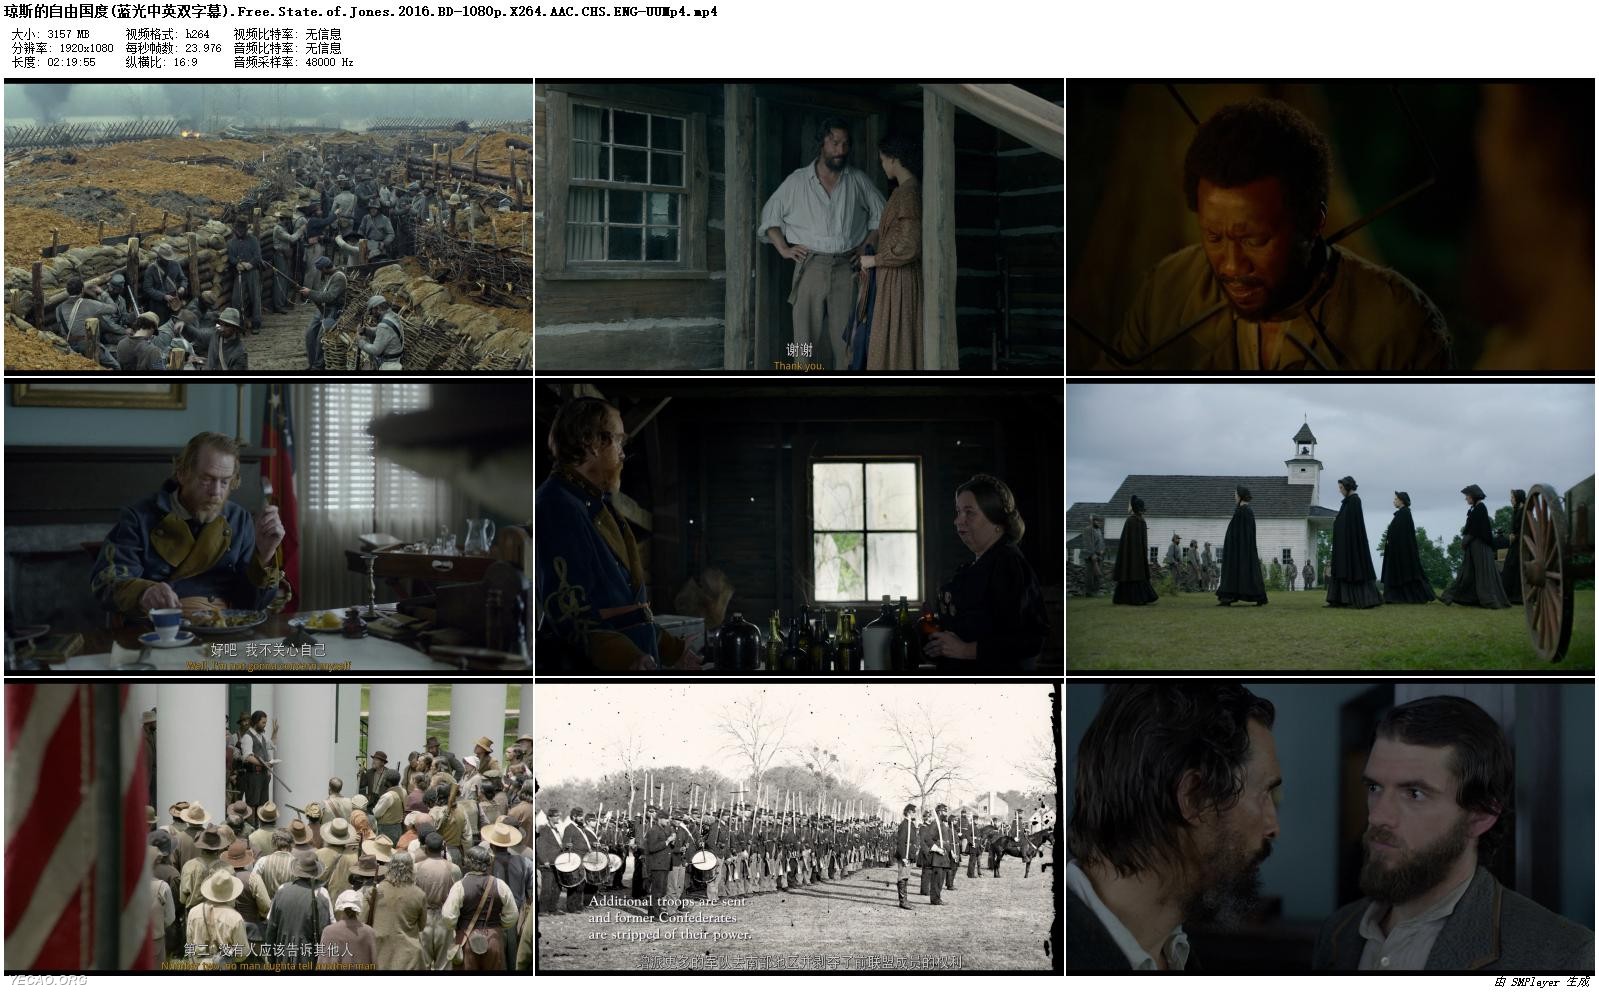 Free.State.of.Jones.2016.BD-1080p.X264.AAC.CHS.ENG-UUMp4_preview.jpg